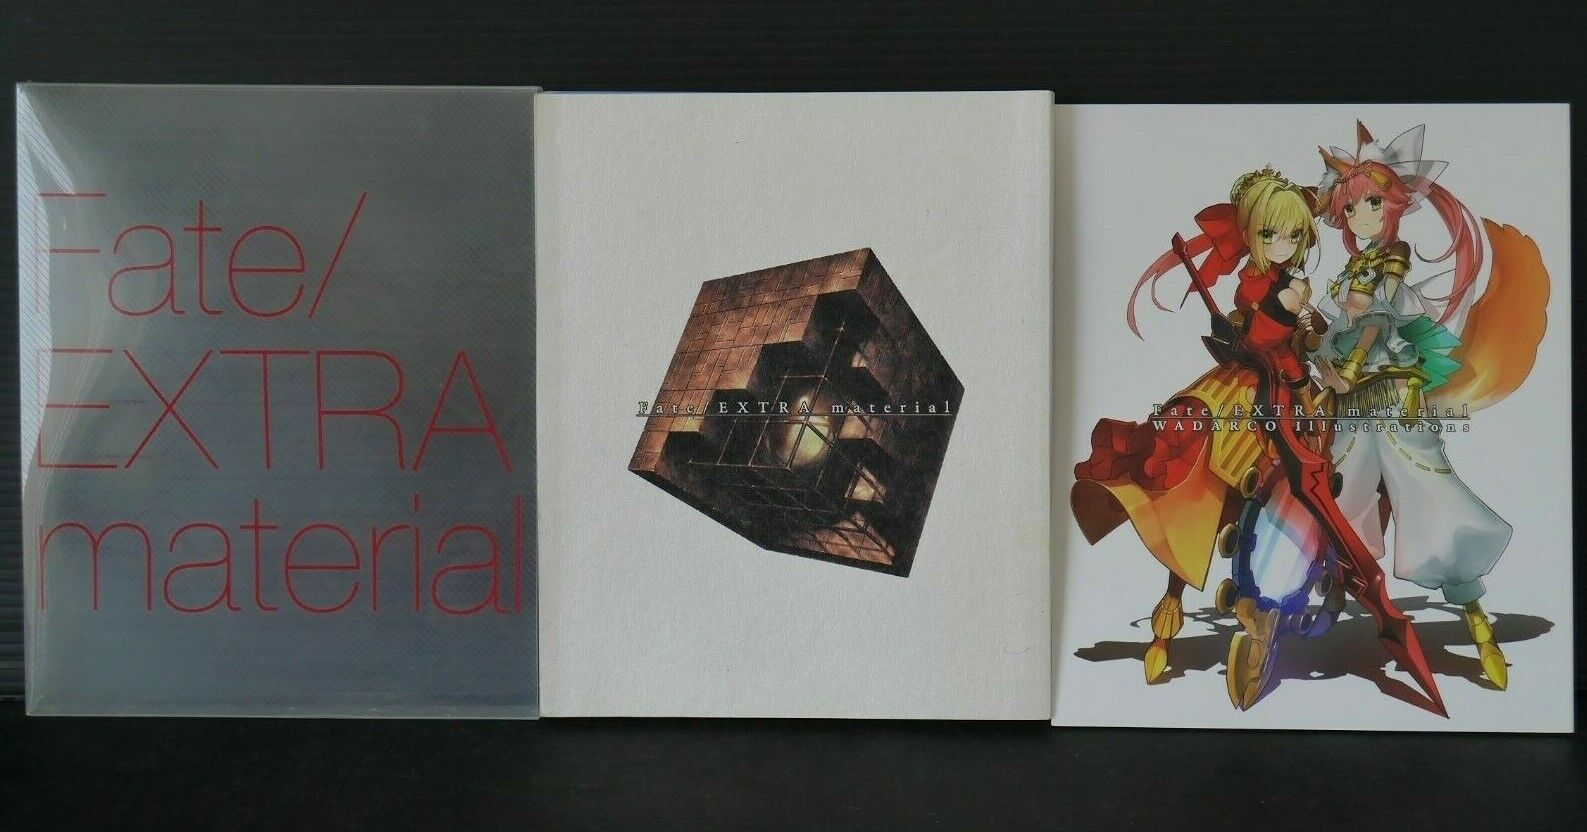 Fate/Extra Material First Limit Edition Book (Illust: wadarco etc.) JAPAN